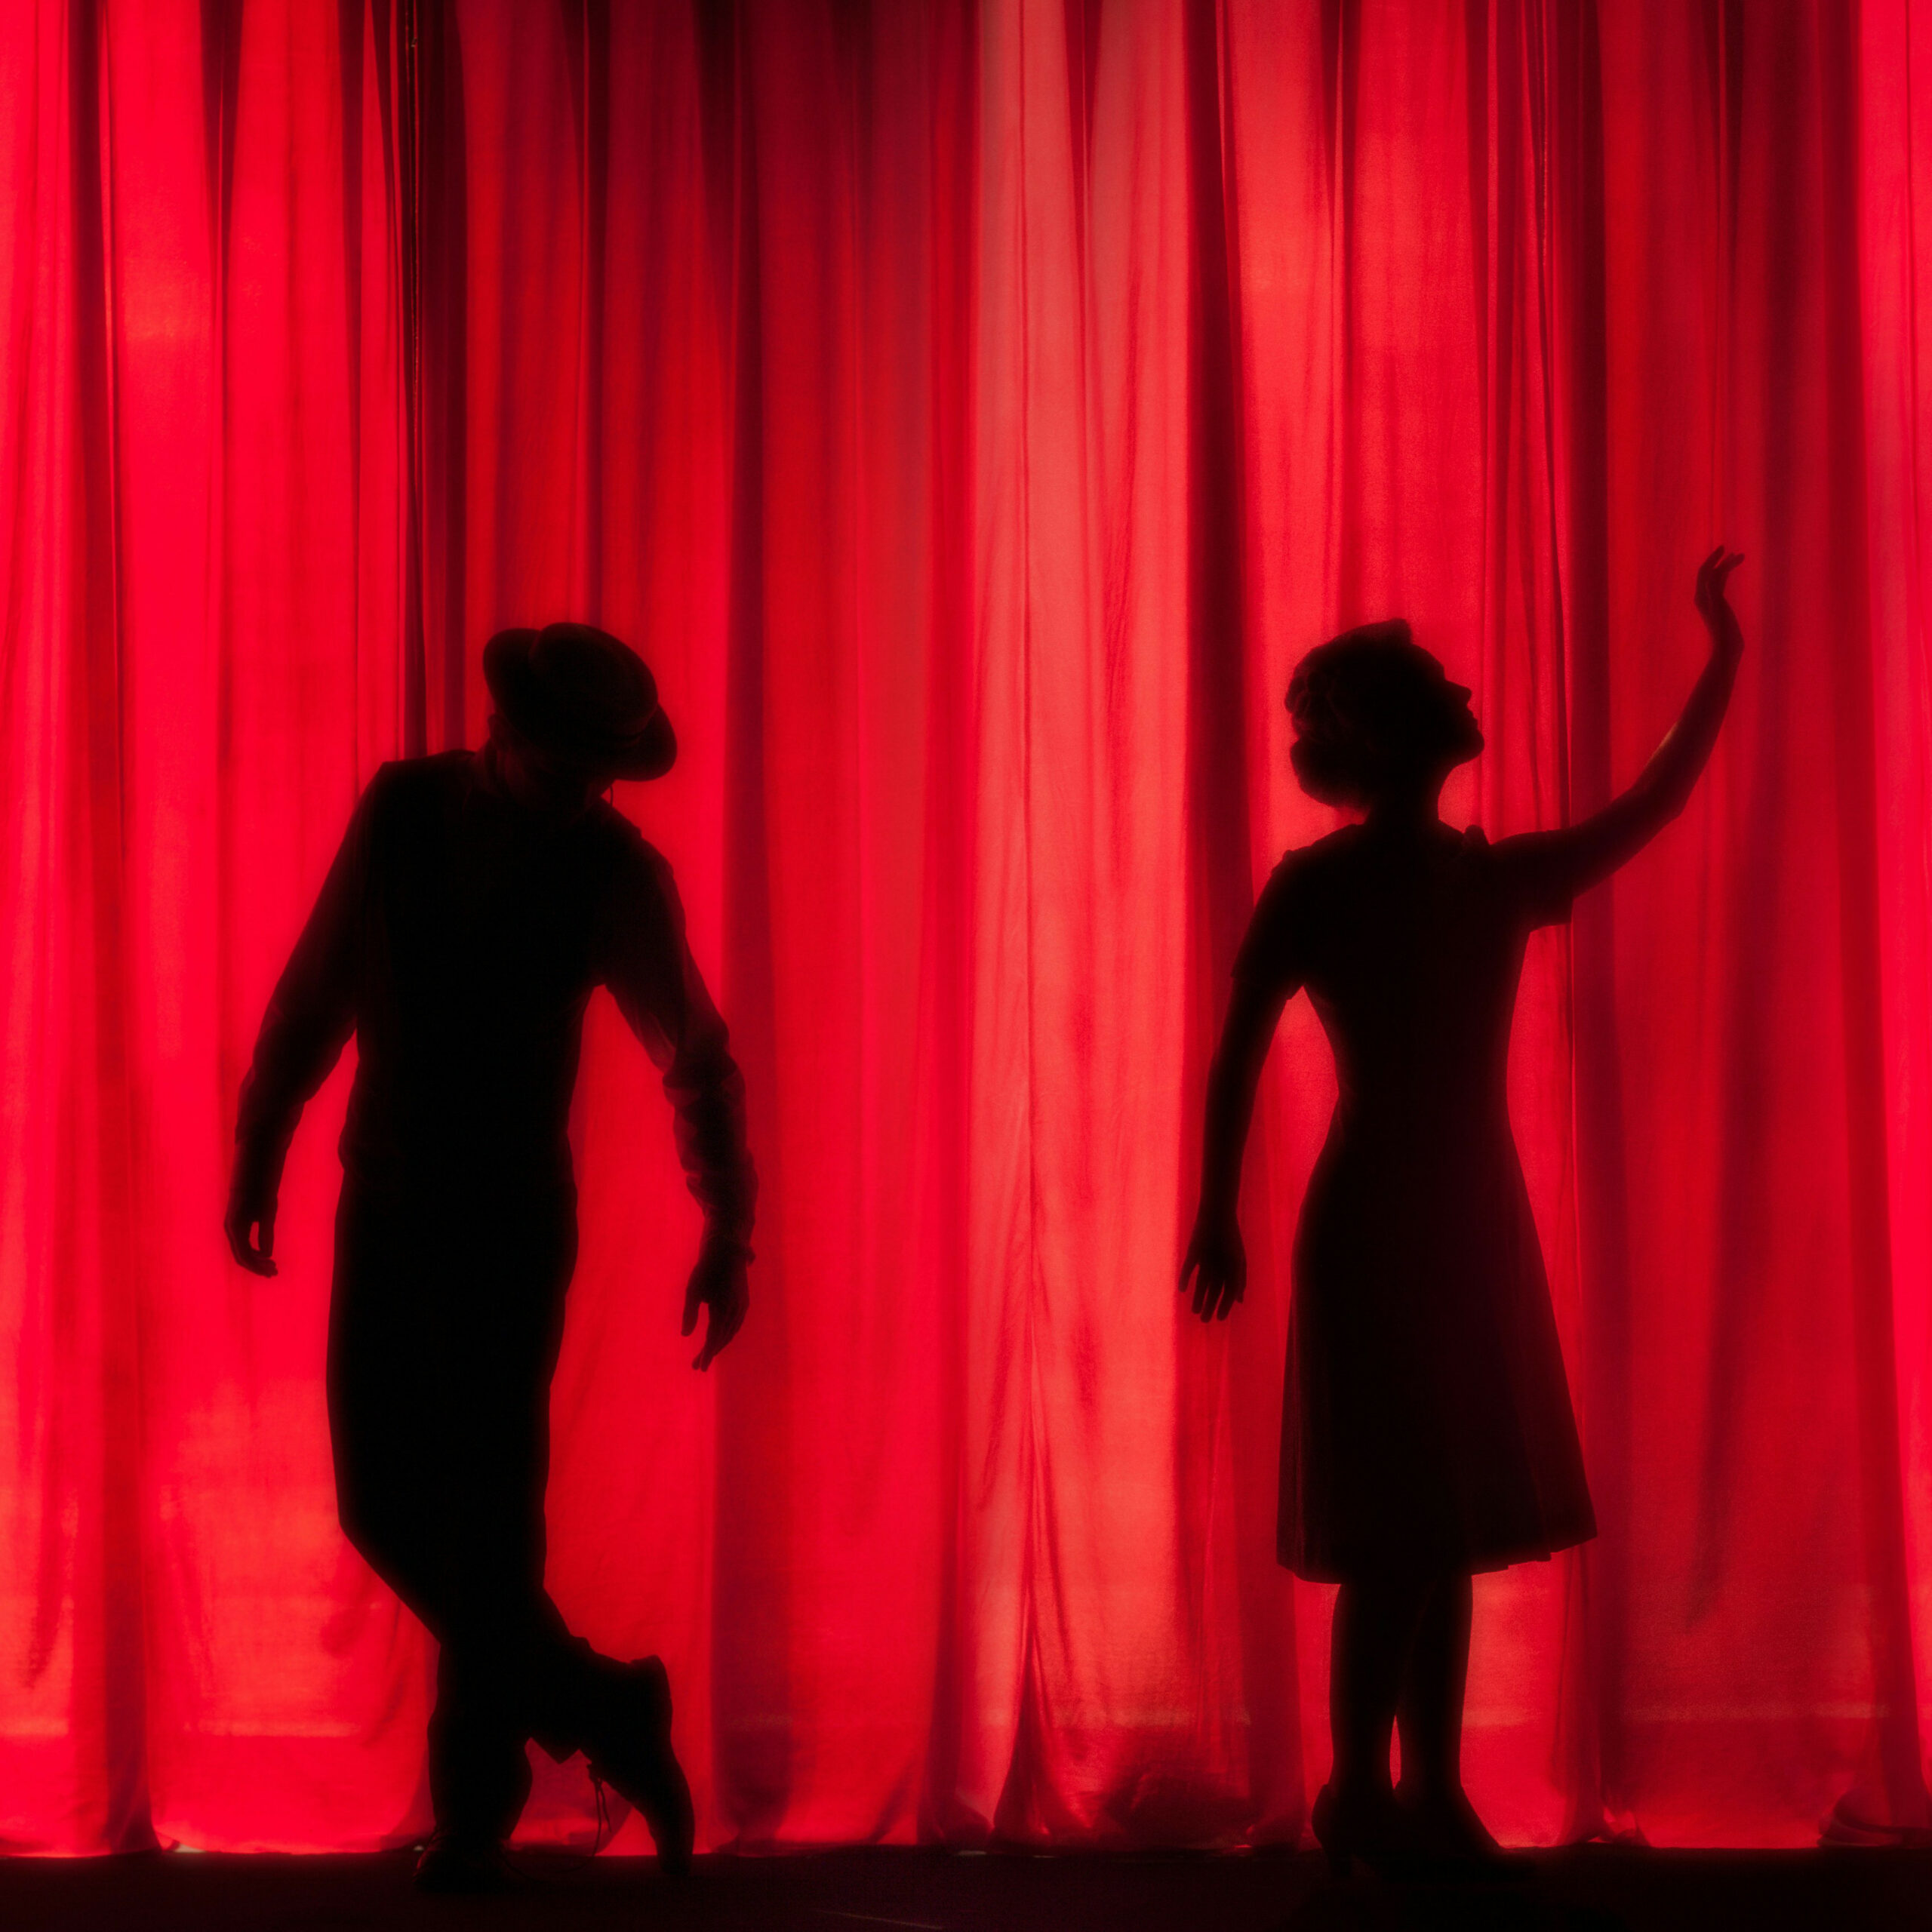 Shadows of two actors in front of a red curtain on a stage. The man on the left is dancing, the woman on the right waves to someone backstage.